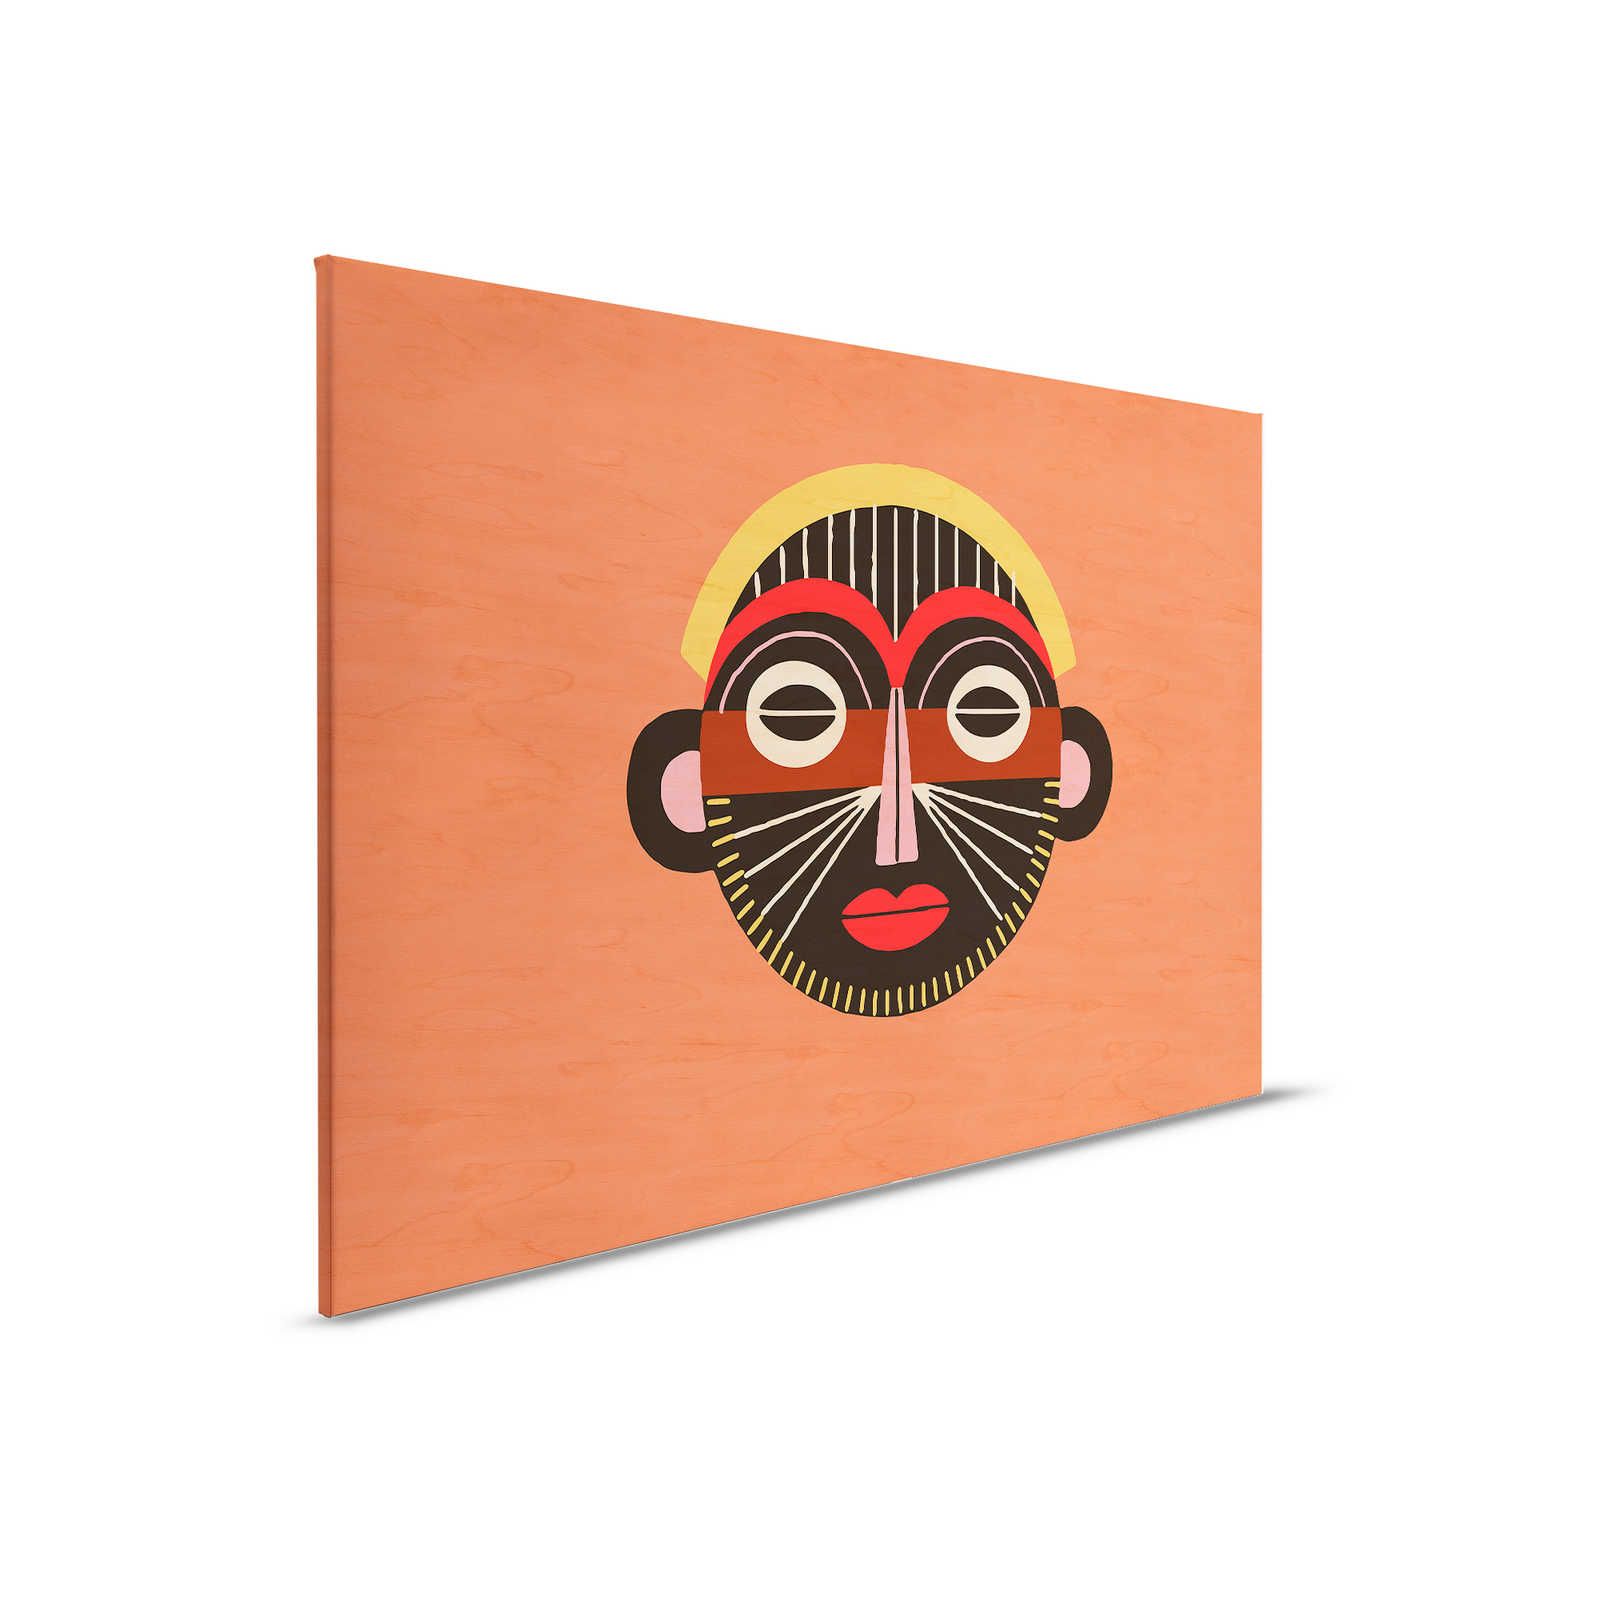         Overseas 2 - Ethno Canvas painting Mask in Tribal Design - 0,90 m x 0,60 m
    